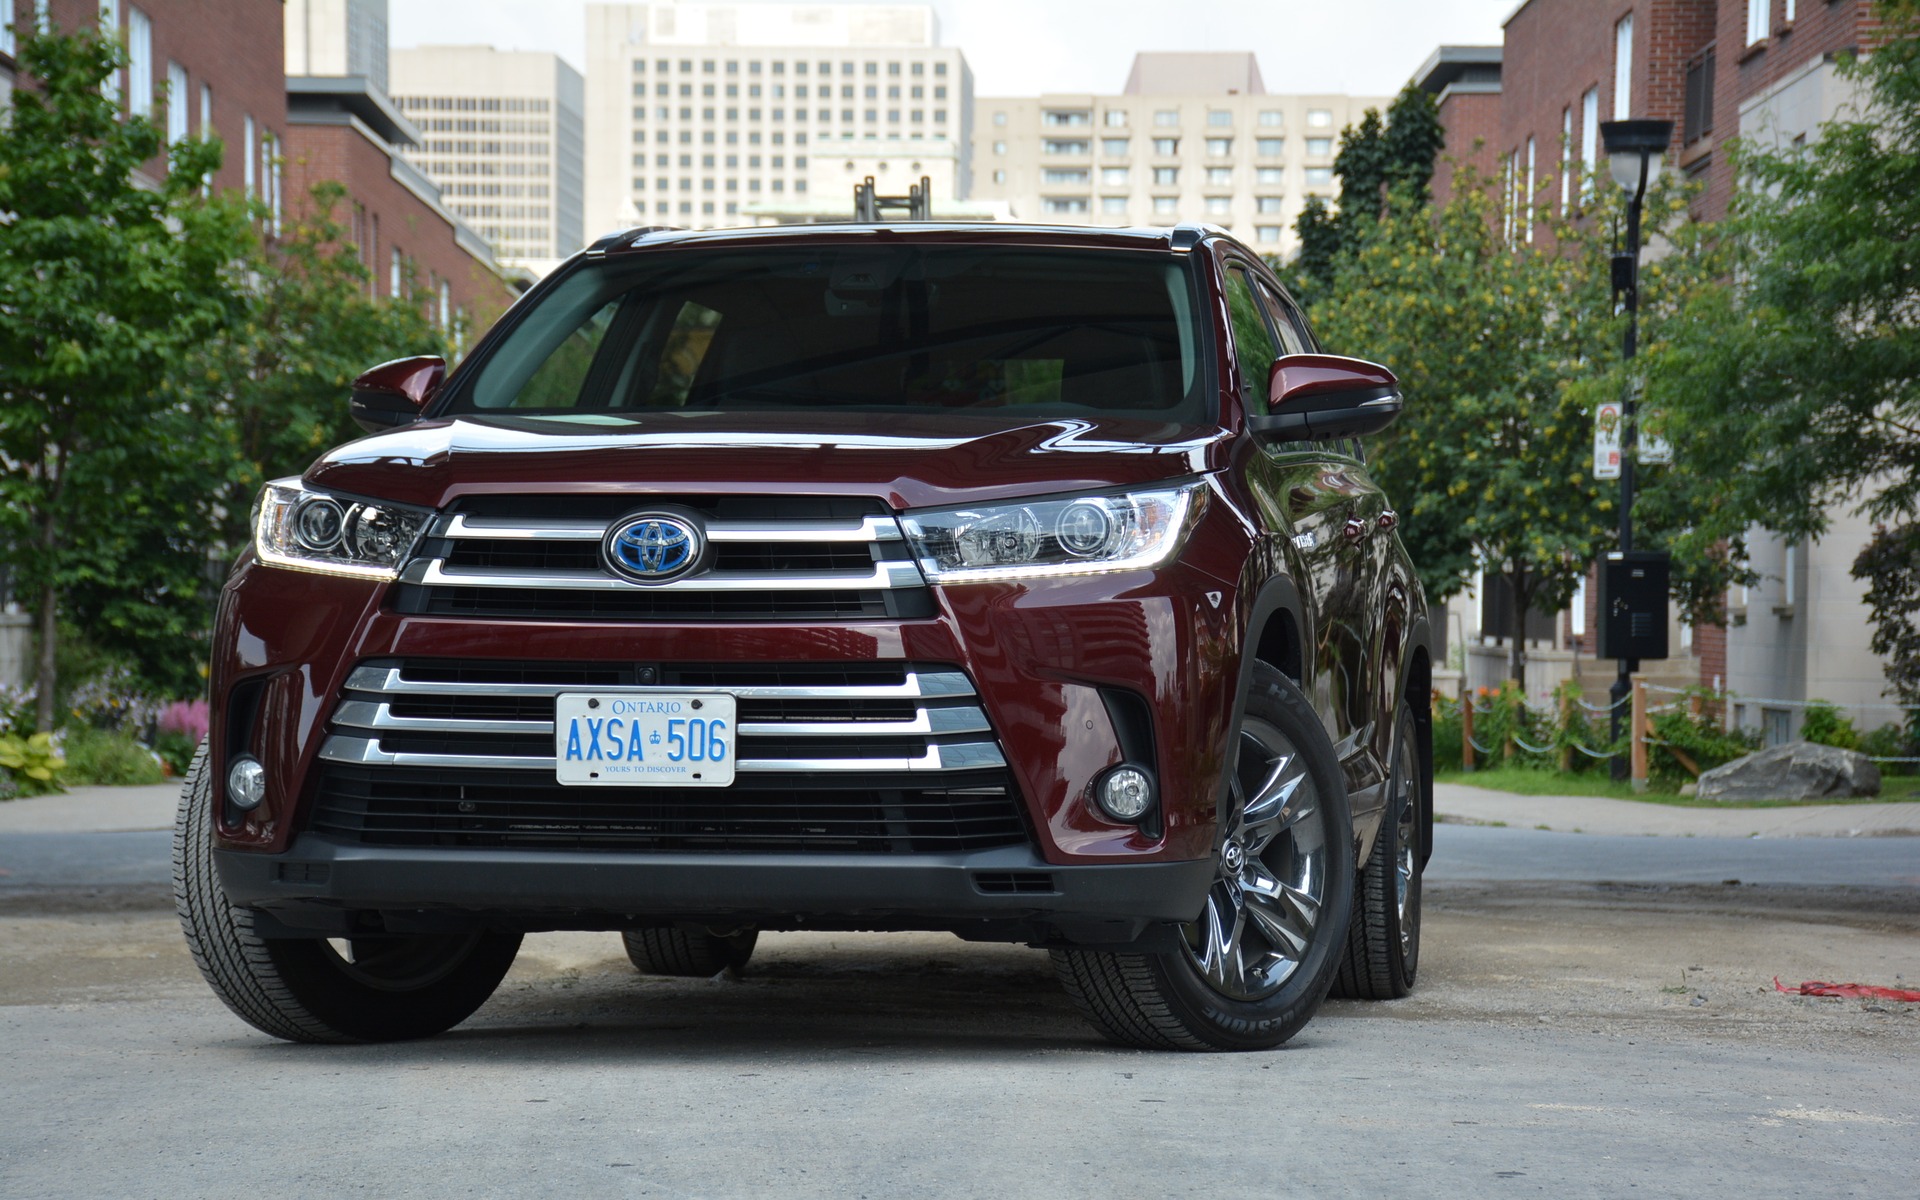 2017 Toyota Highlander Hybrid: Checks all the Boxes - The Car Guide